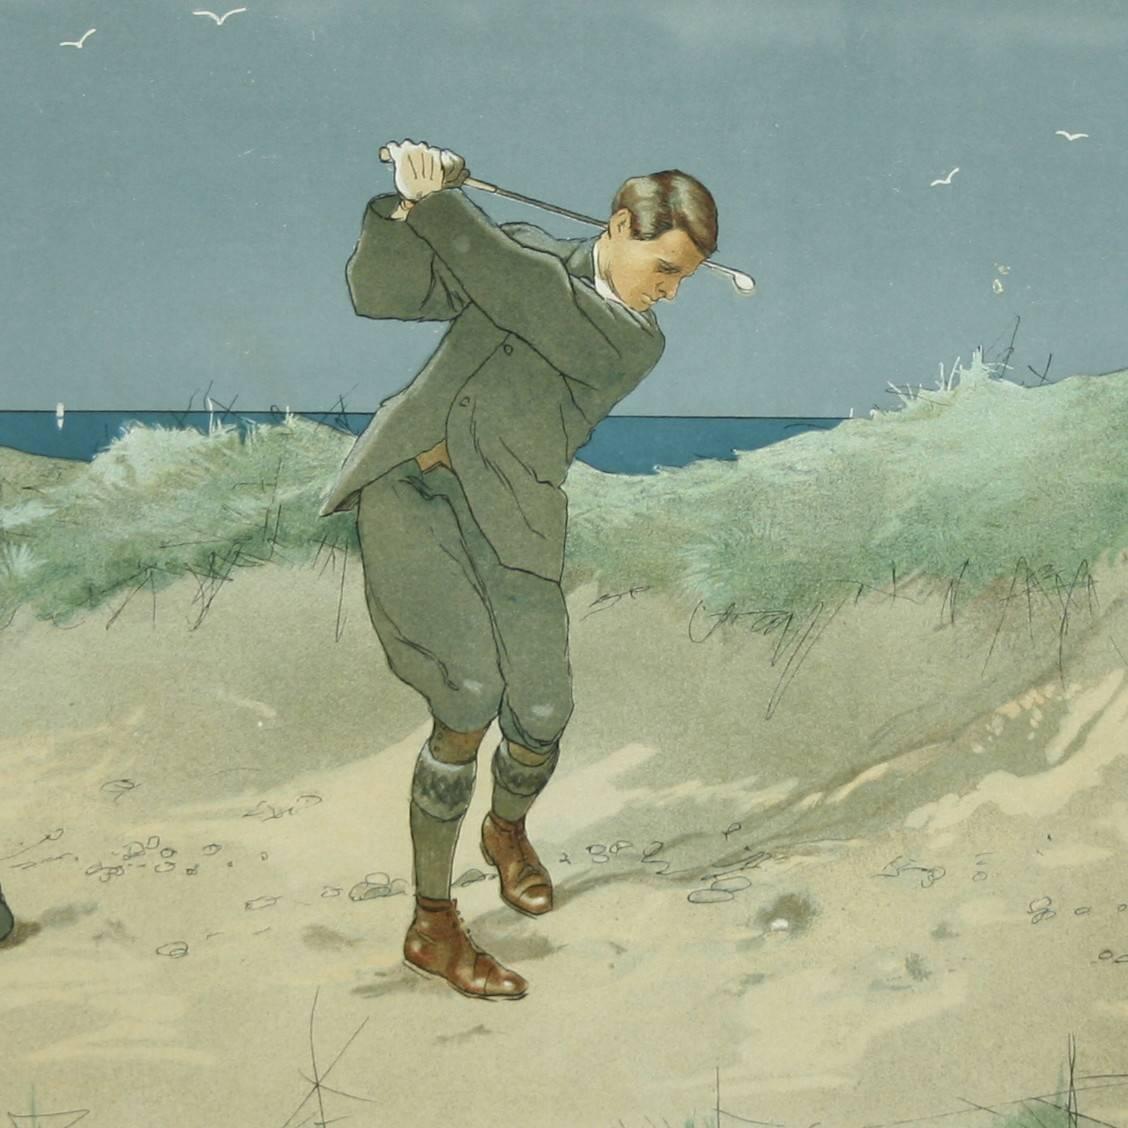 Vintage golf print by John Hassall.
A very nice framed golfing chromolithograph after J. Hassall, 